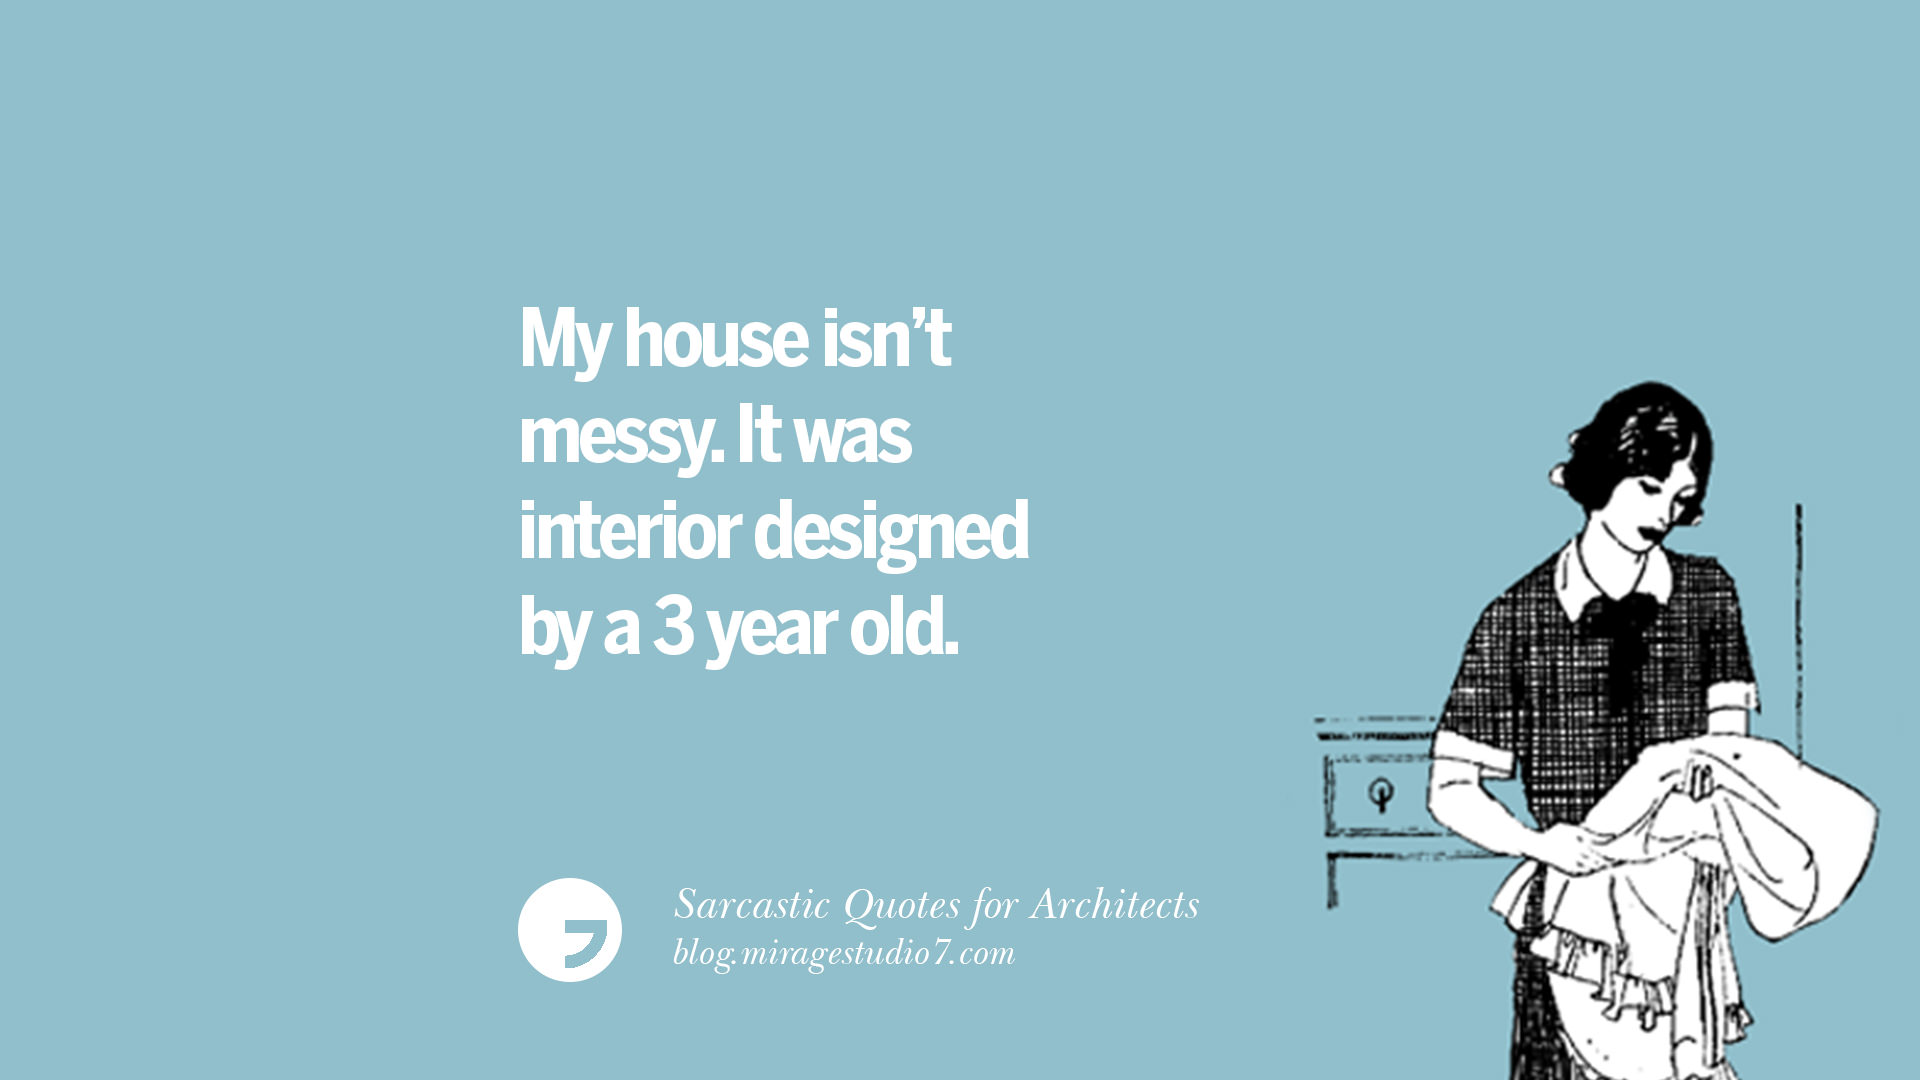 DESIGN BADDIE Only the 15 Funniest Interior Design and Architecture Memes